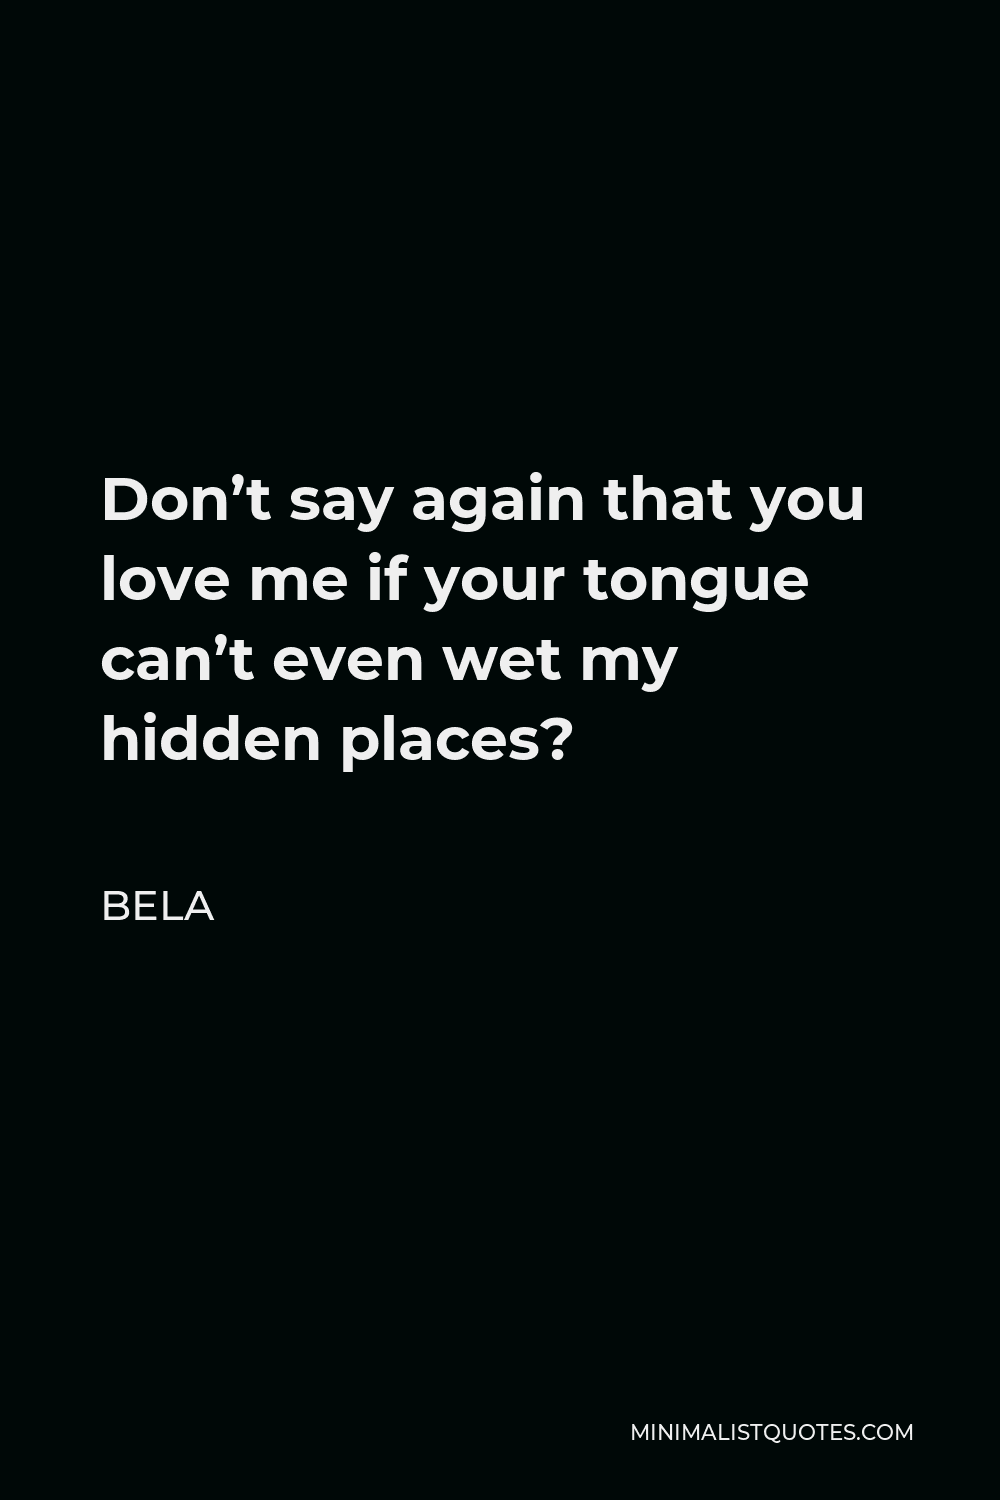 Bela Quote - Don’t say again that you love me if your tongue can’t even wet my hidden places?